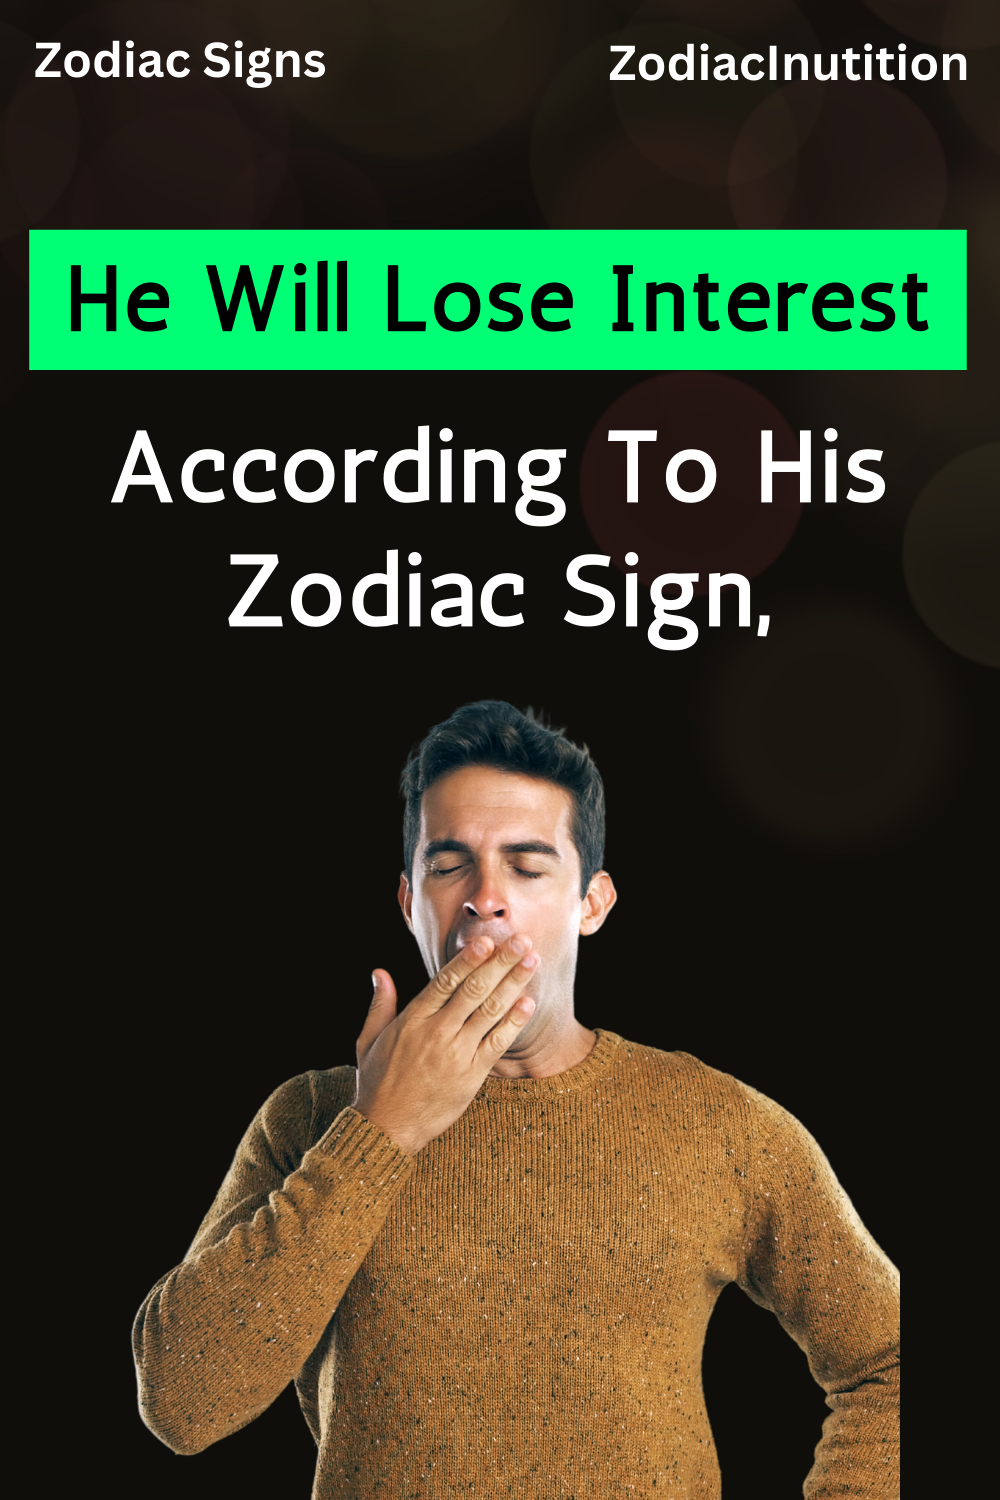 So, According To His Zodiac Sign, He Will Lose Interest